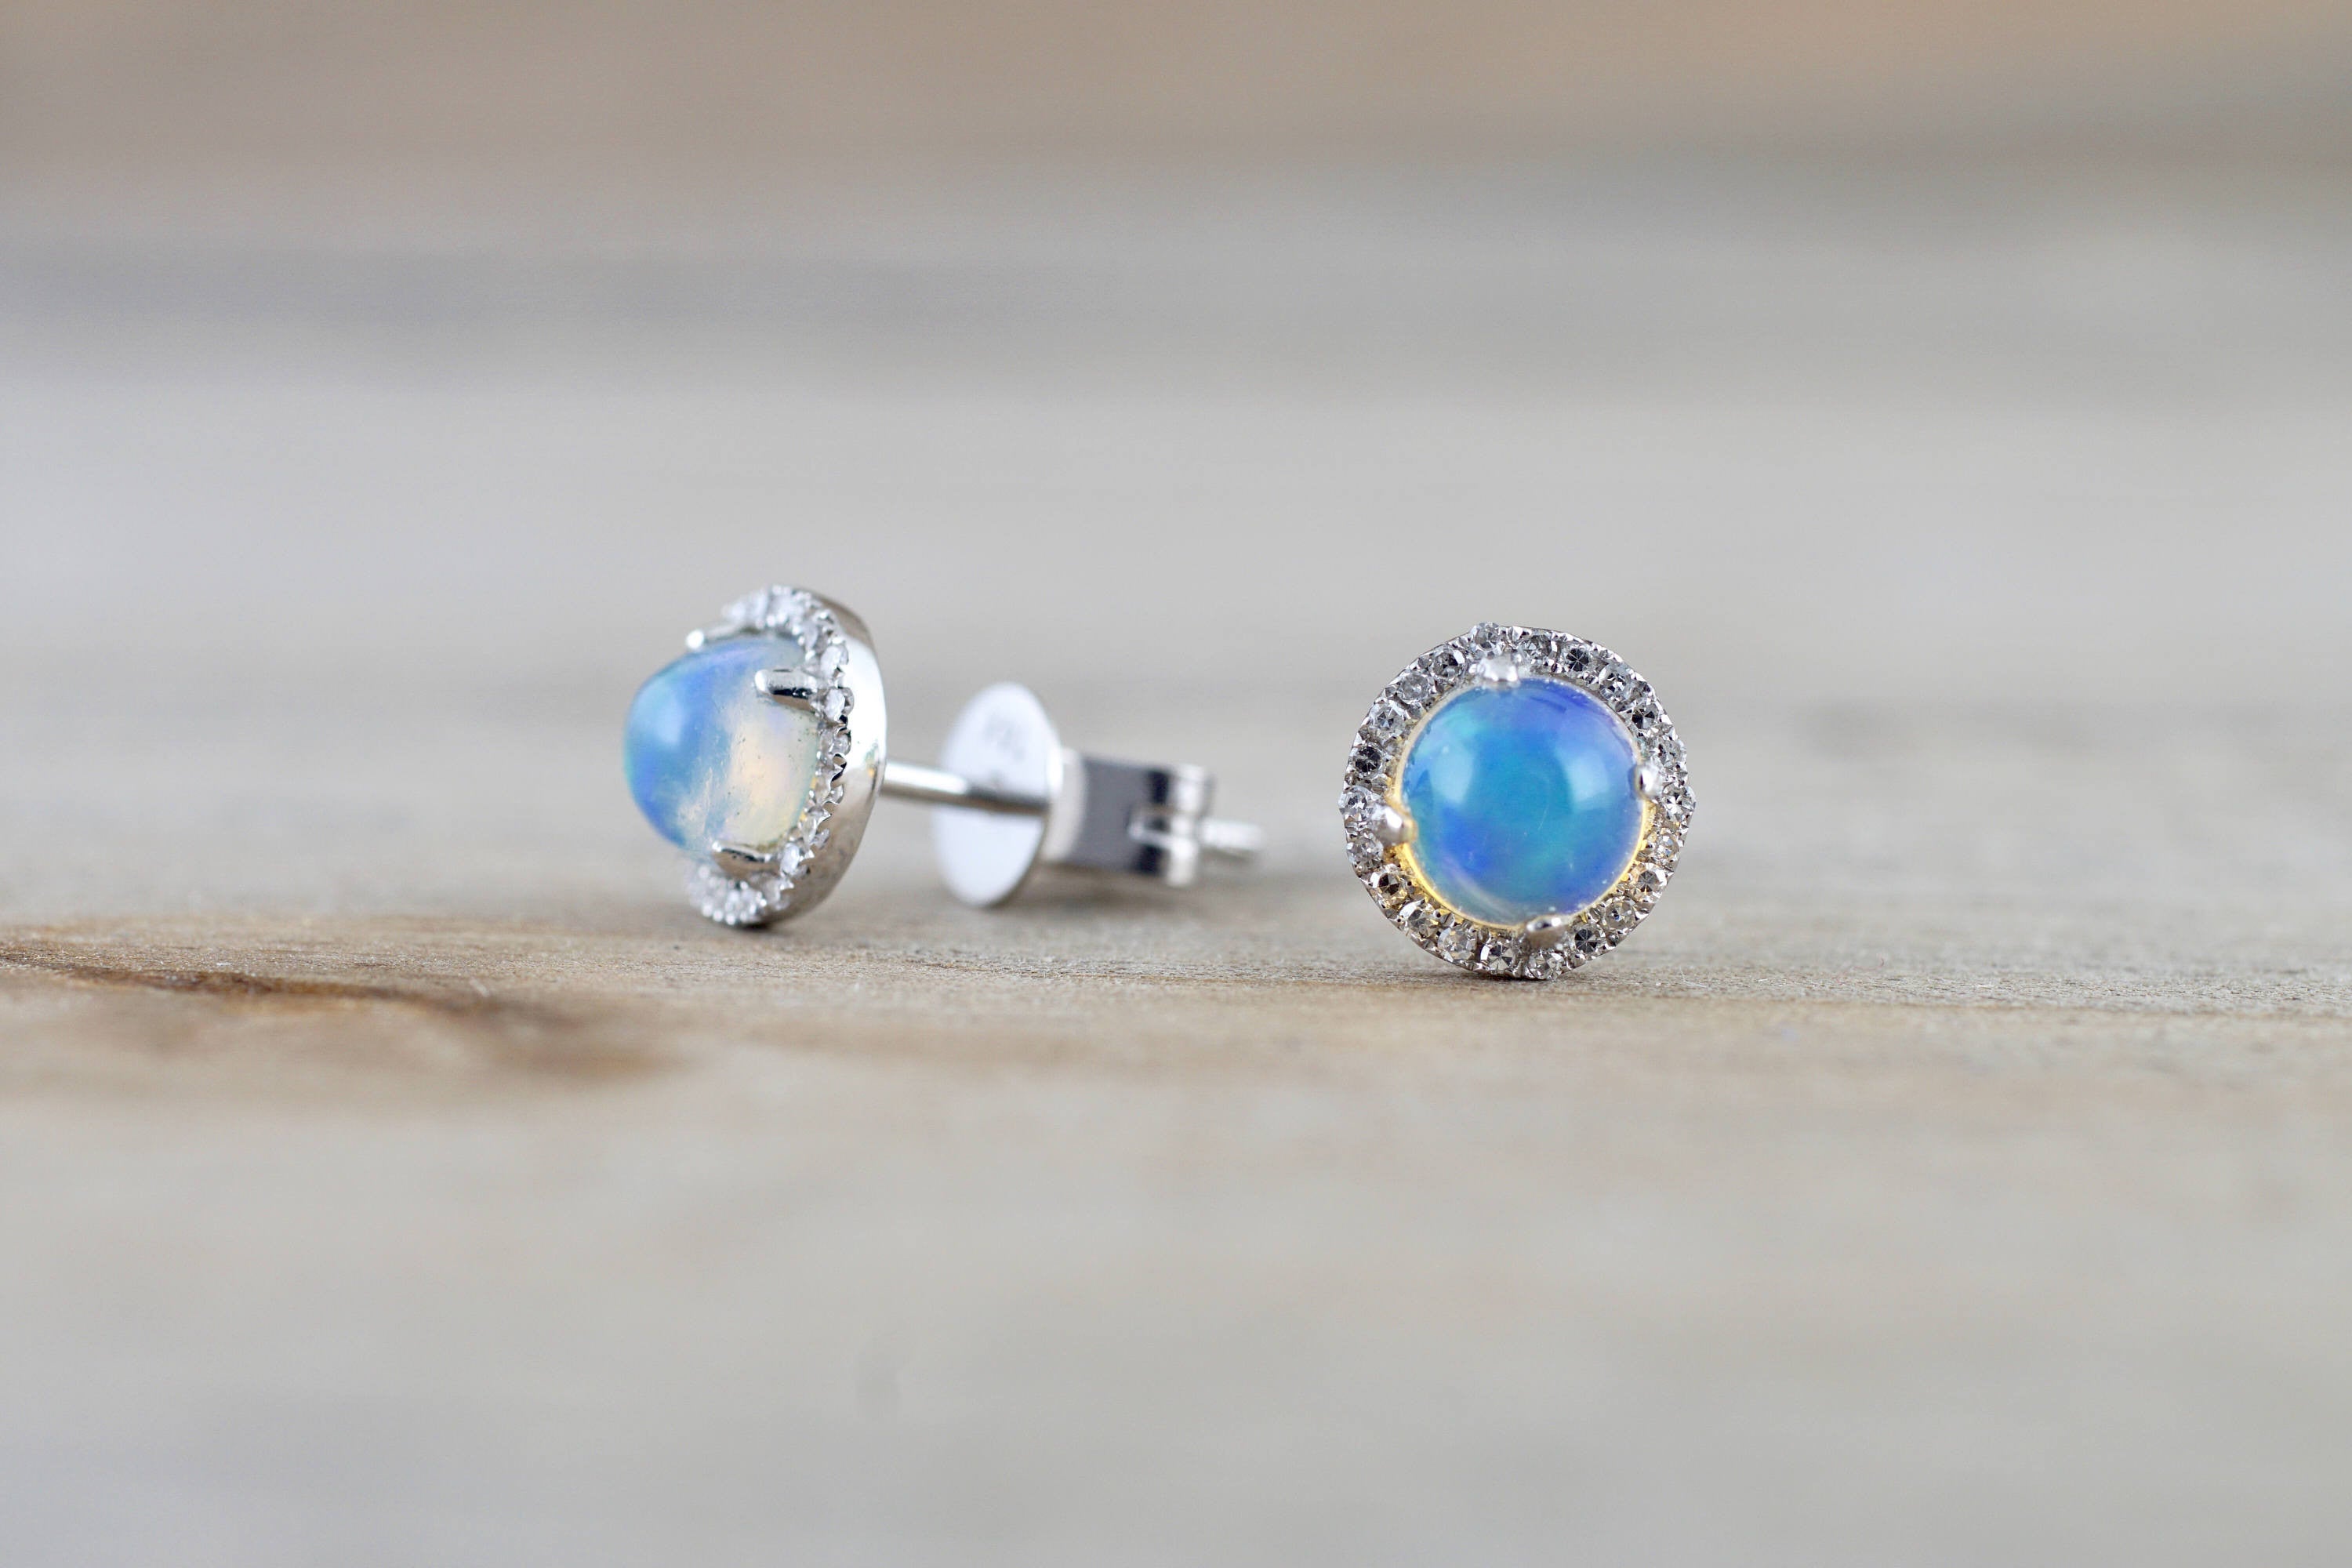 14k White Gold Round Opal Diamond Halo Earrings Studs – Brilliant Facets